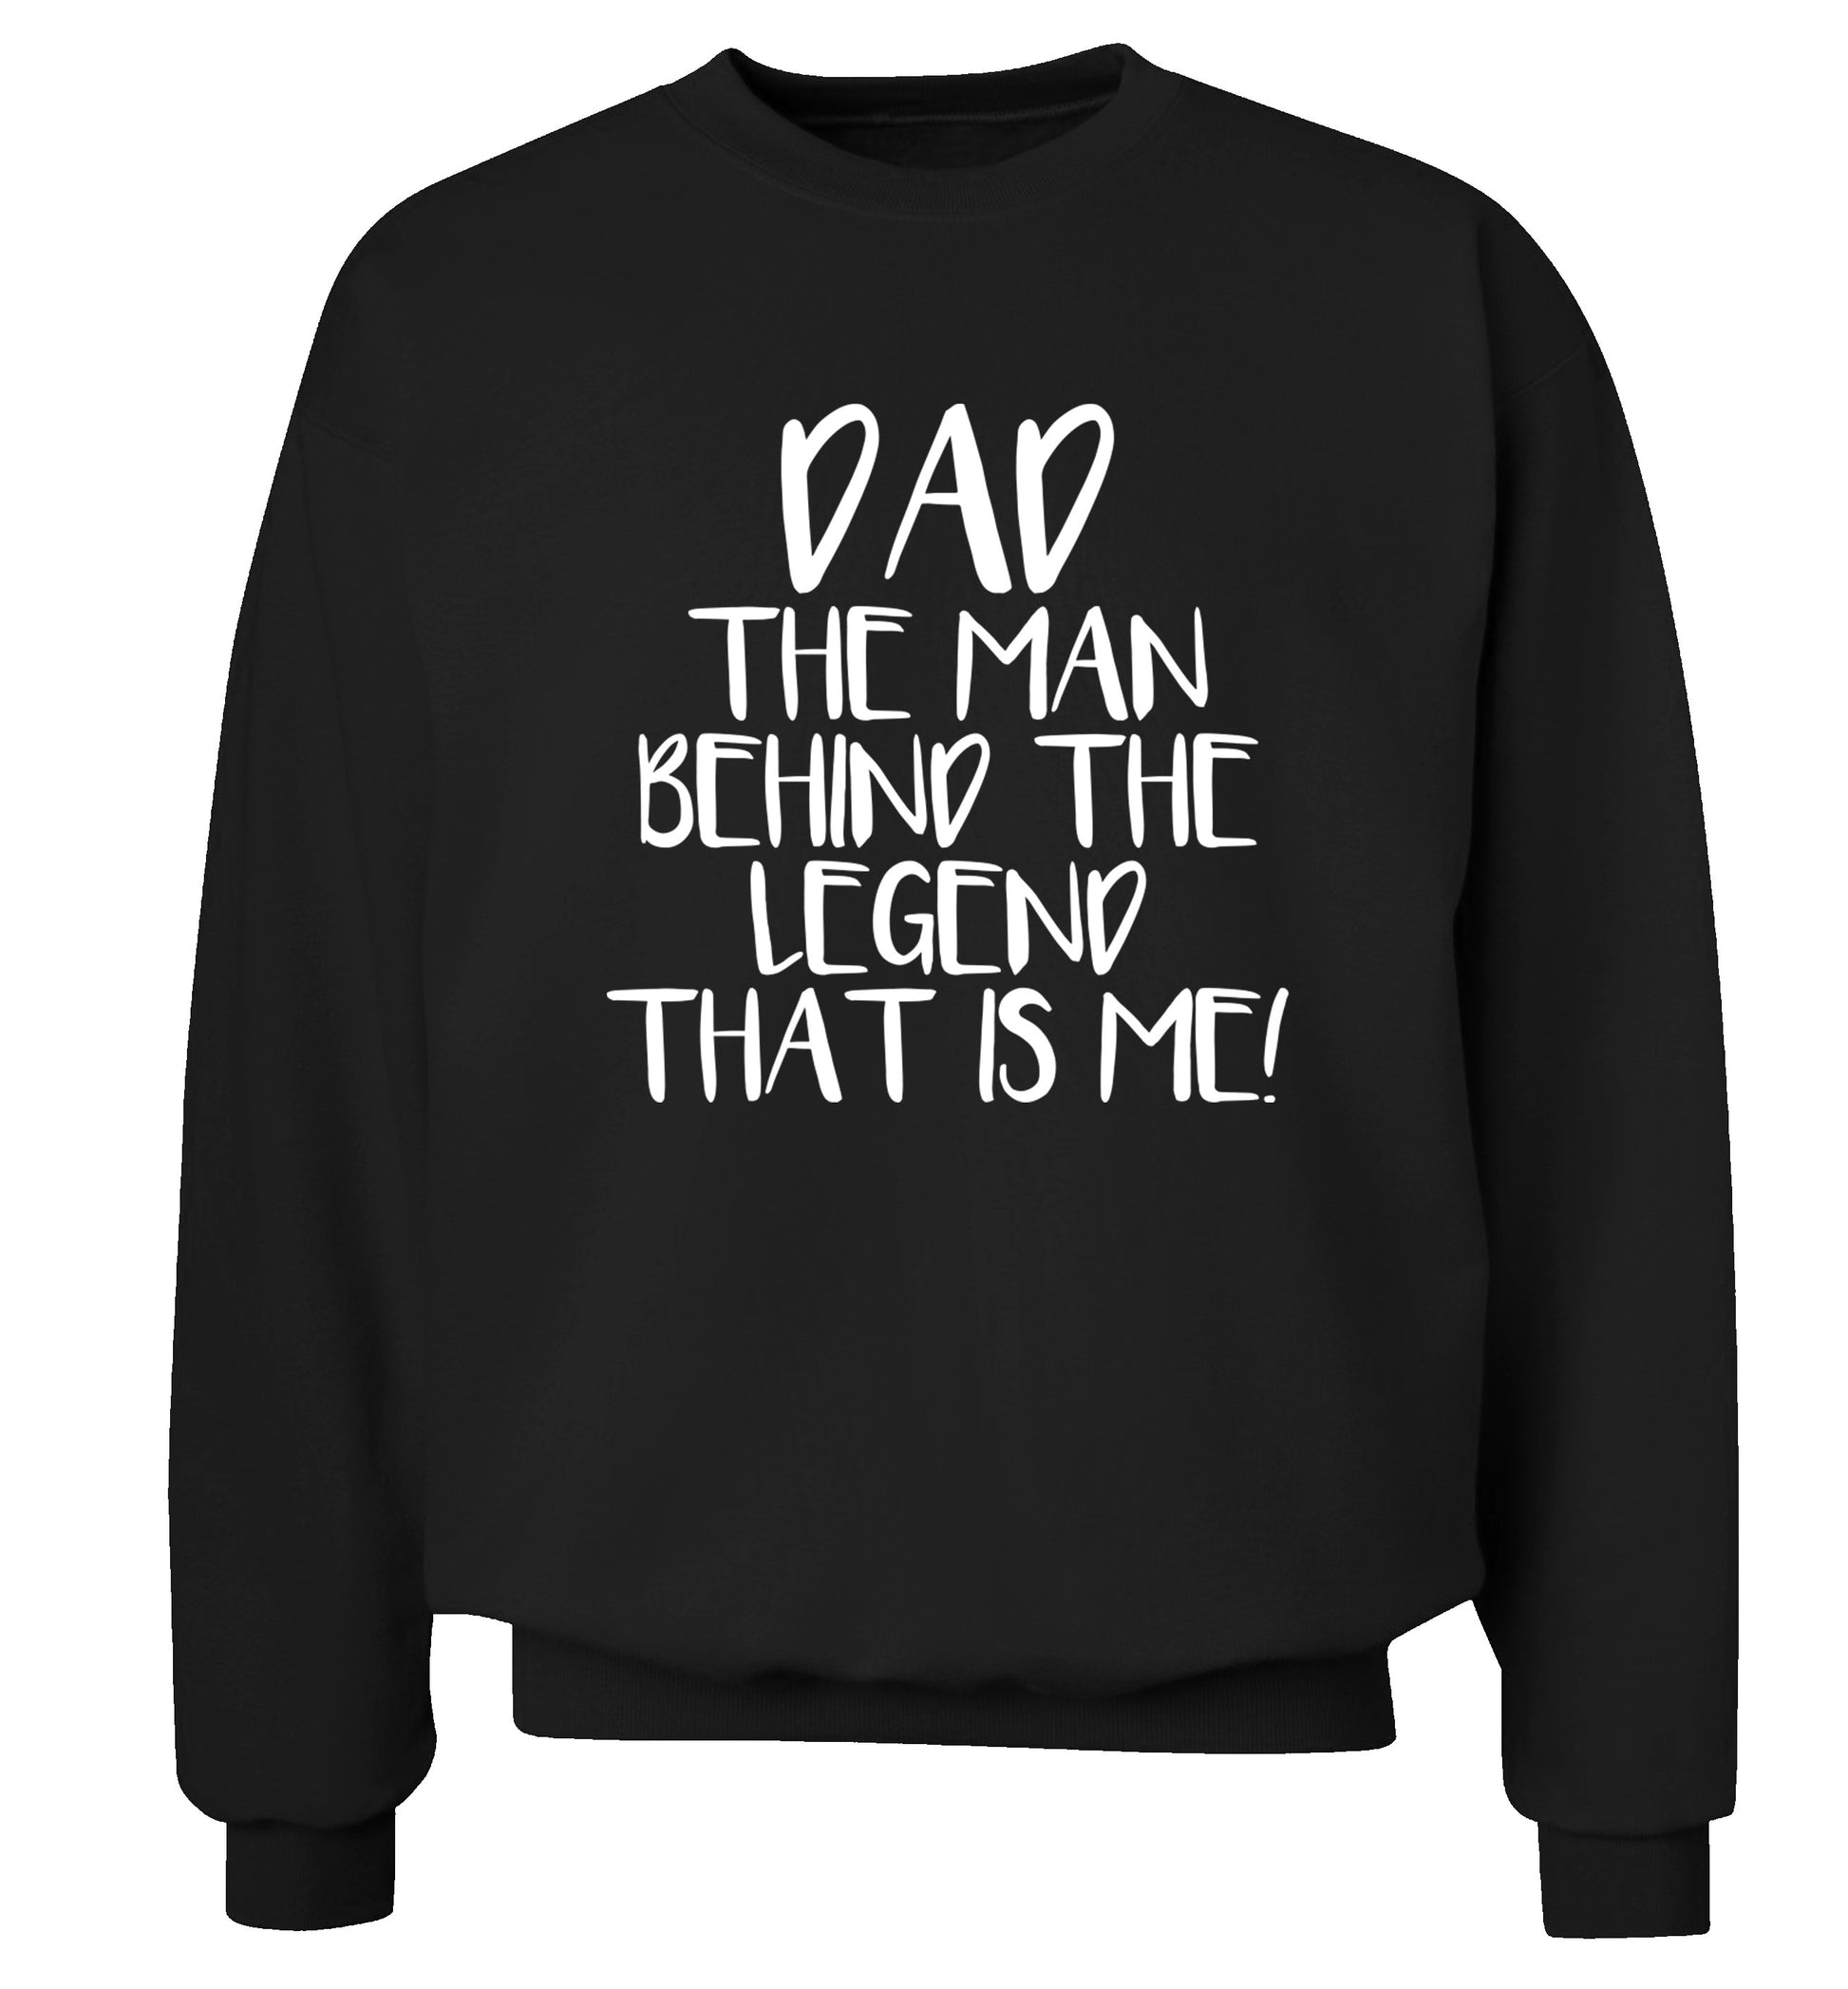 Dad the man behind the legend that is me! Adult's unisex black Sweater 2XL